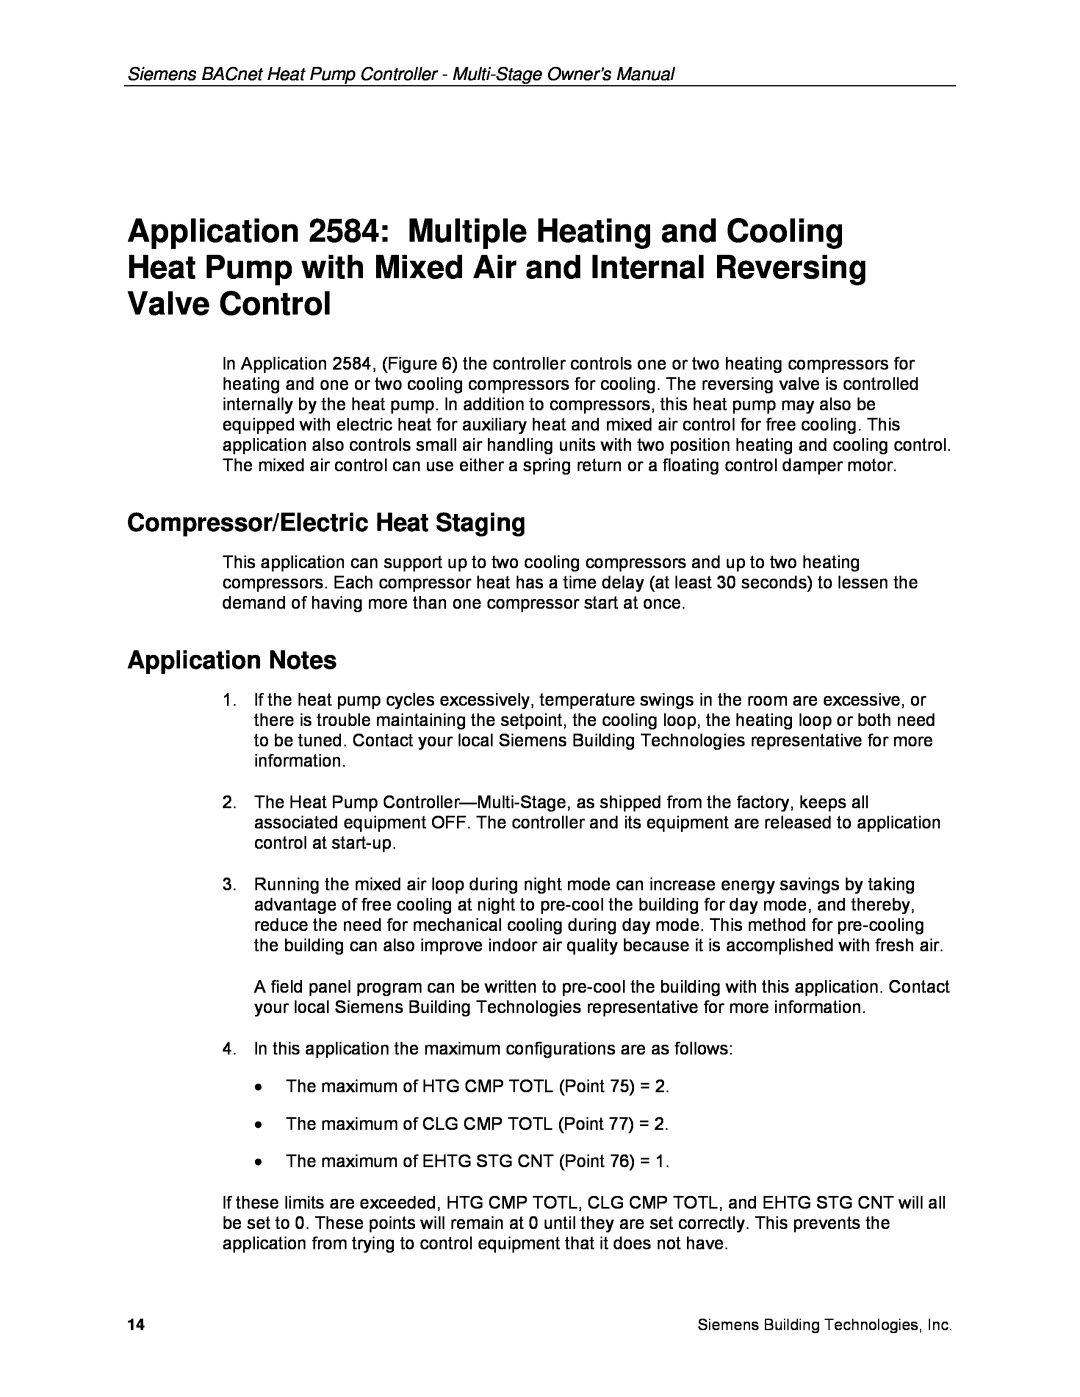 Siemens 125-699 owner manual Compressor/Electric Heat Staging, Application Notes 